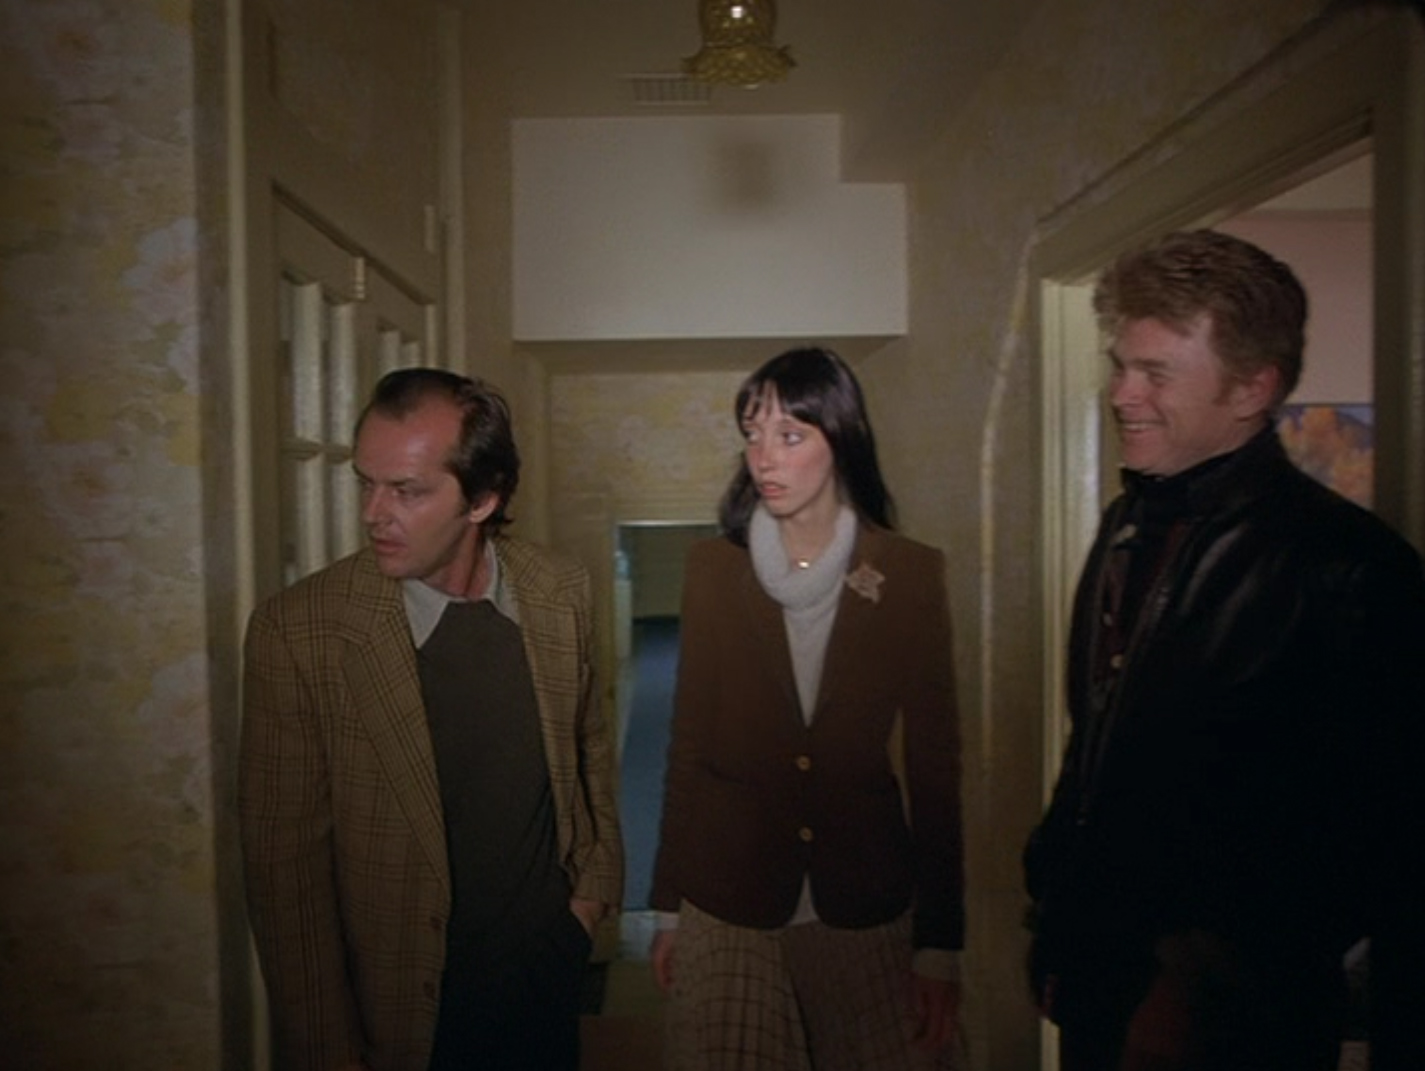 The Shining - Wendy unbolts the door to let Jack in